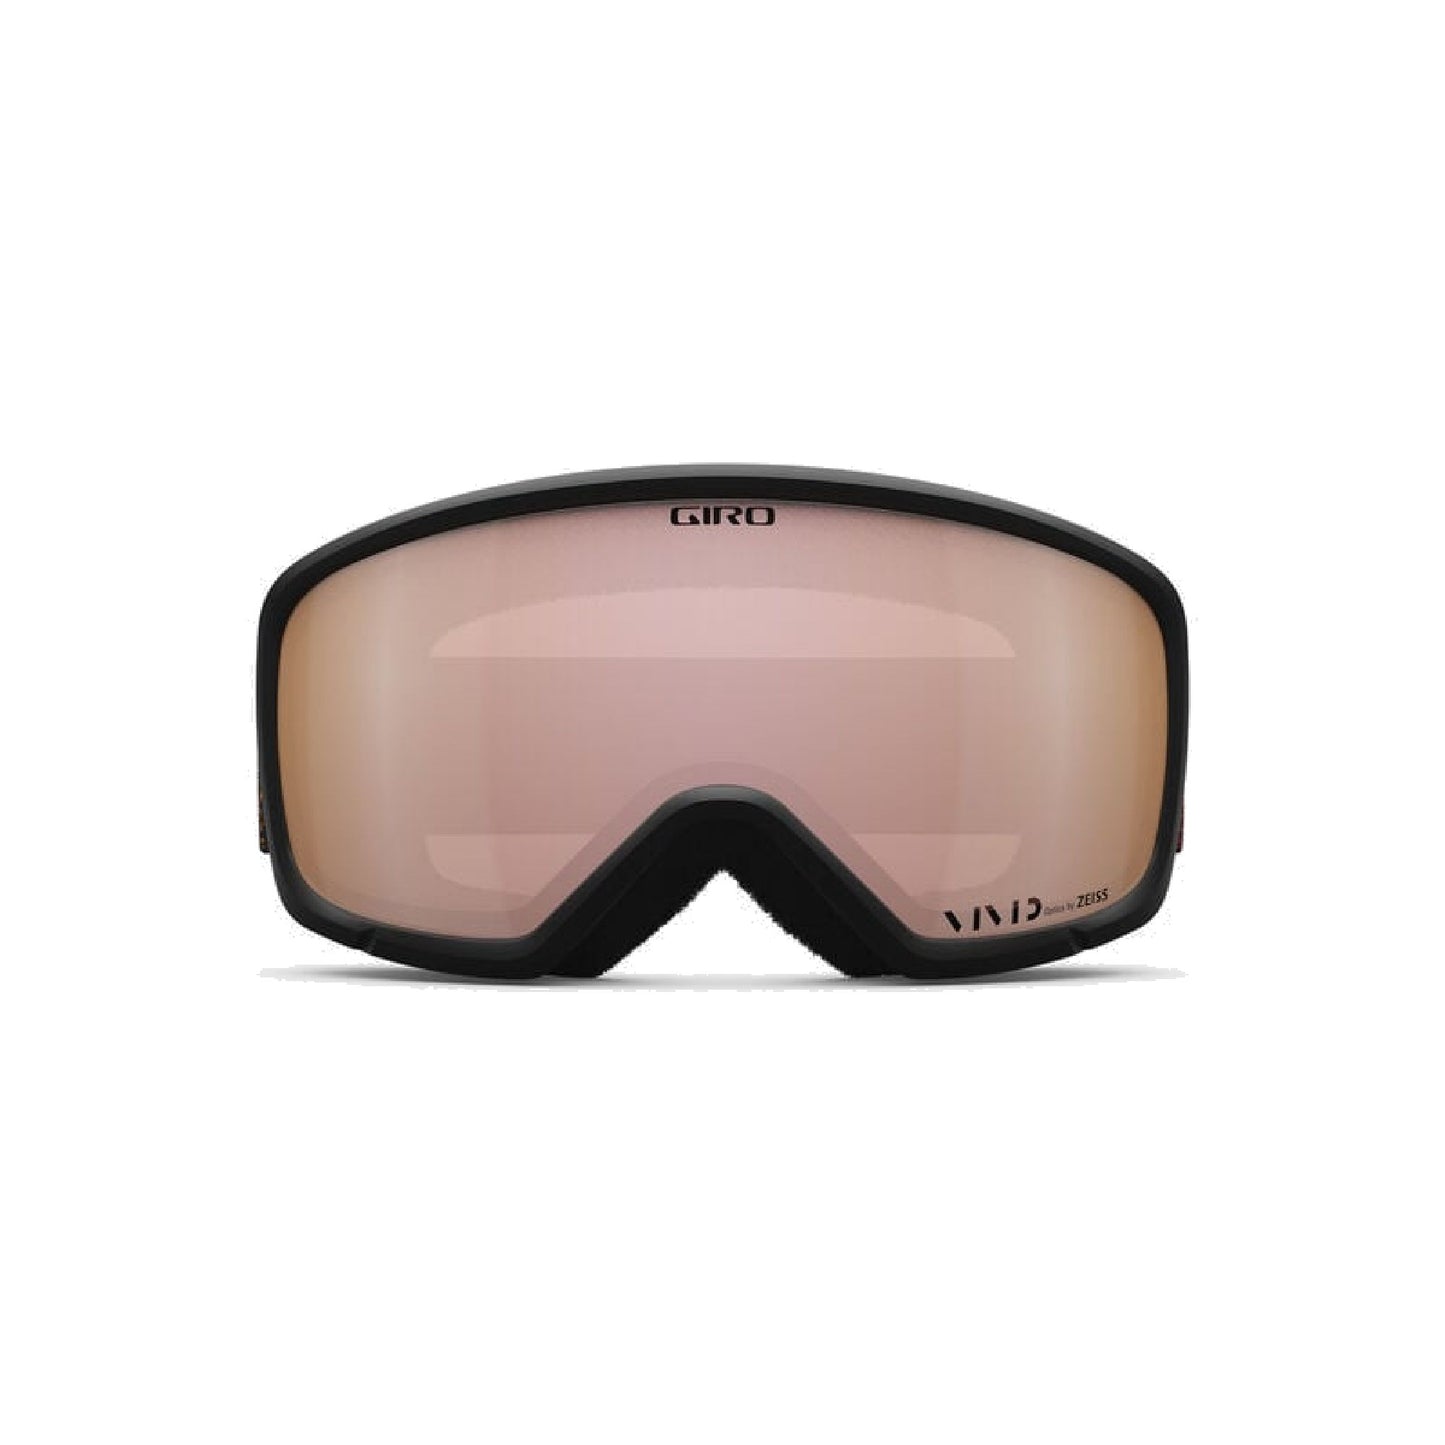 Giro Women's Millie Snow Goggles Tiger Lily/Monarch Orange Expedition/Vivid Rose Gold Snow Goggles